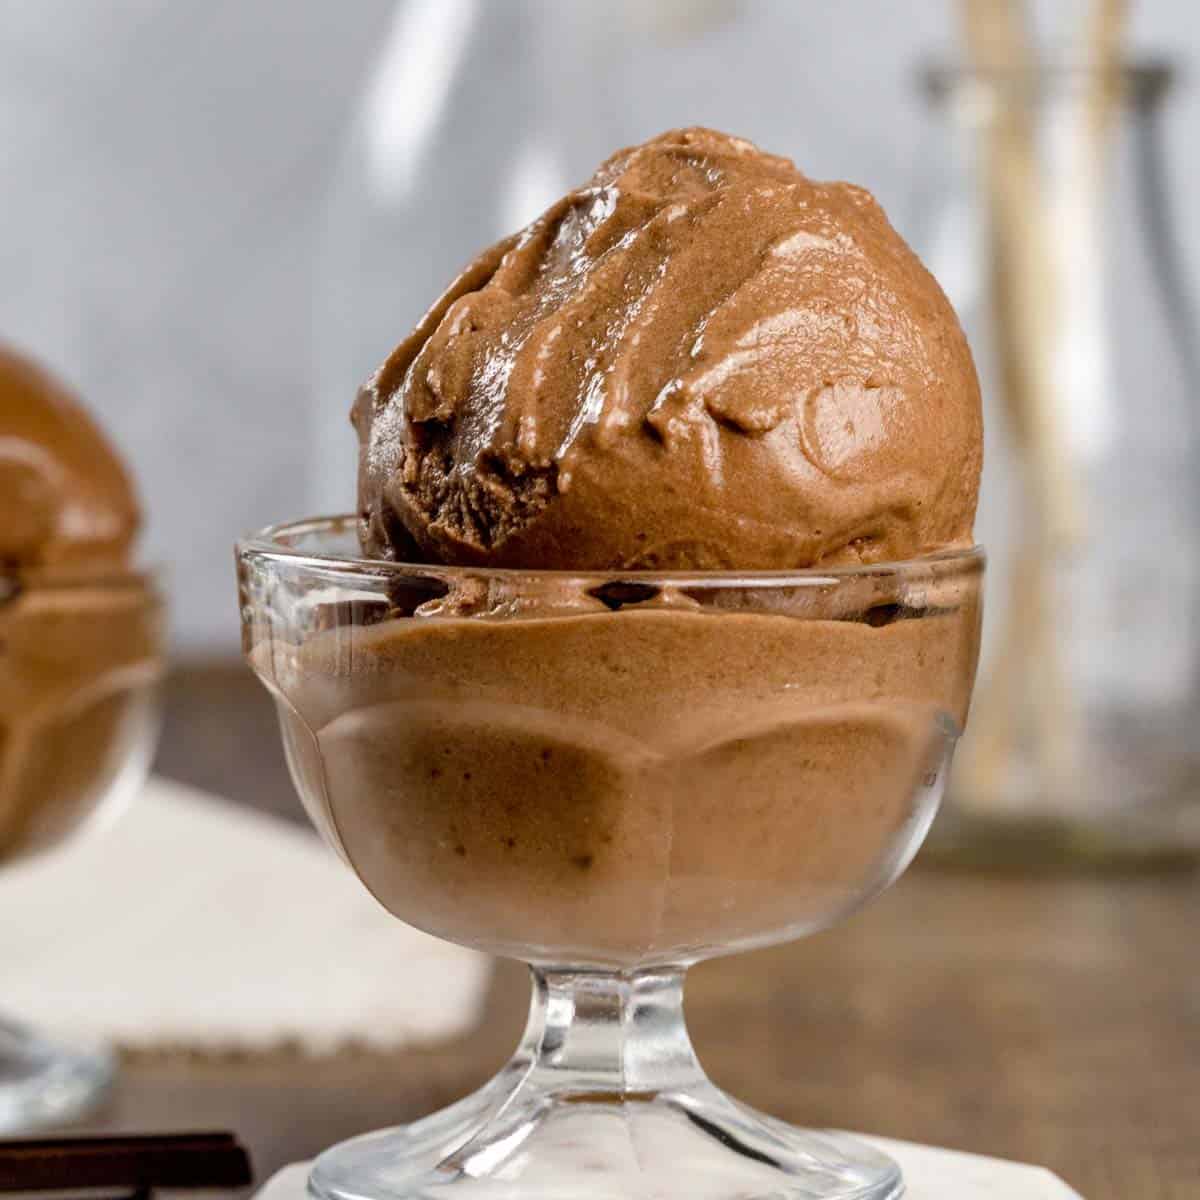 A close up of a glass bowl filled with scoops of chocolate nice cream.